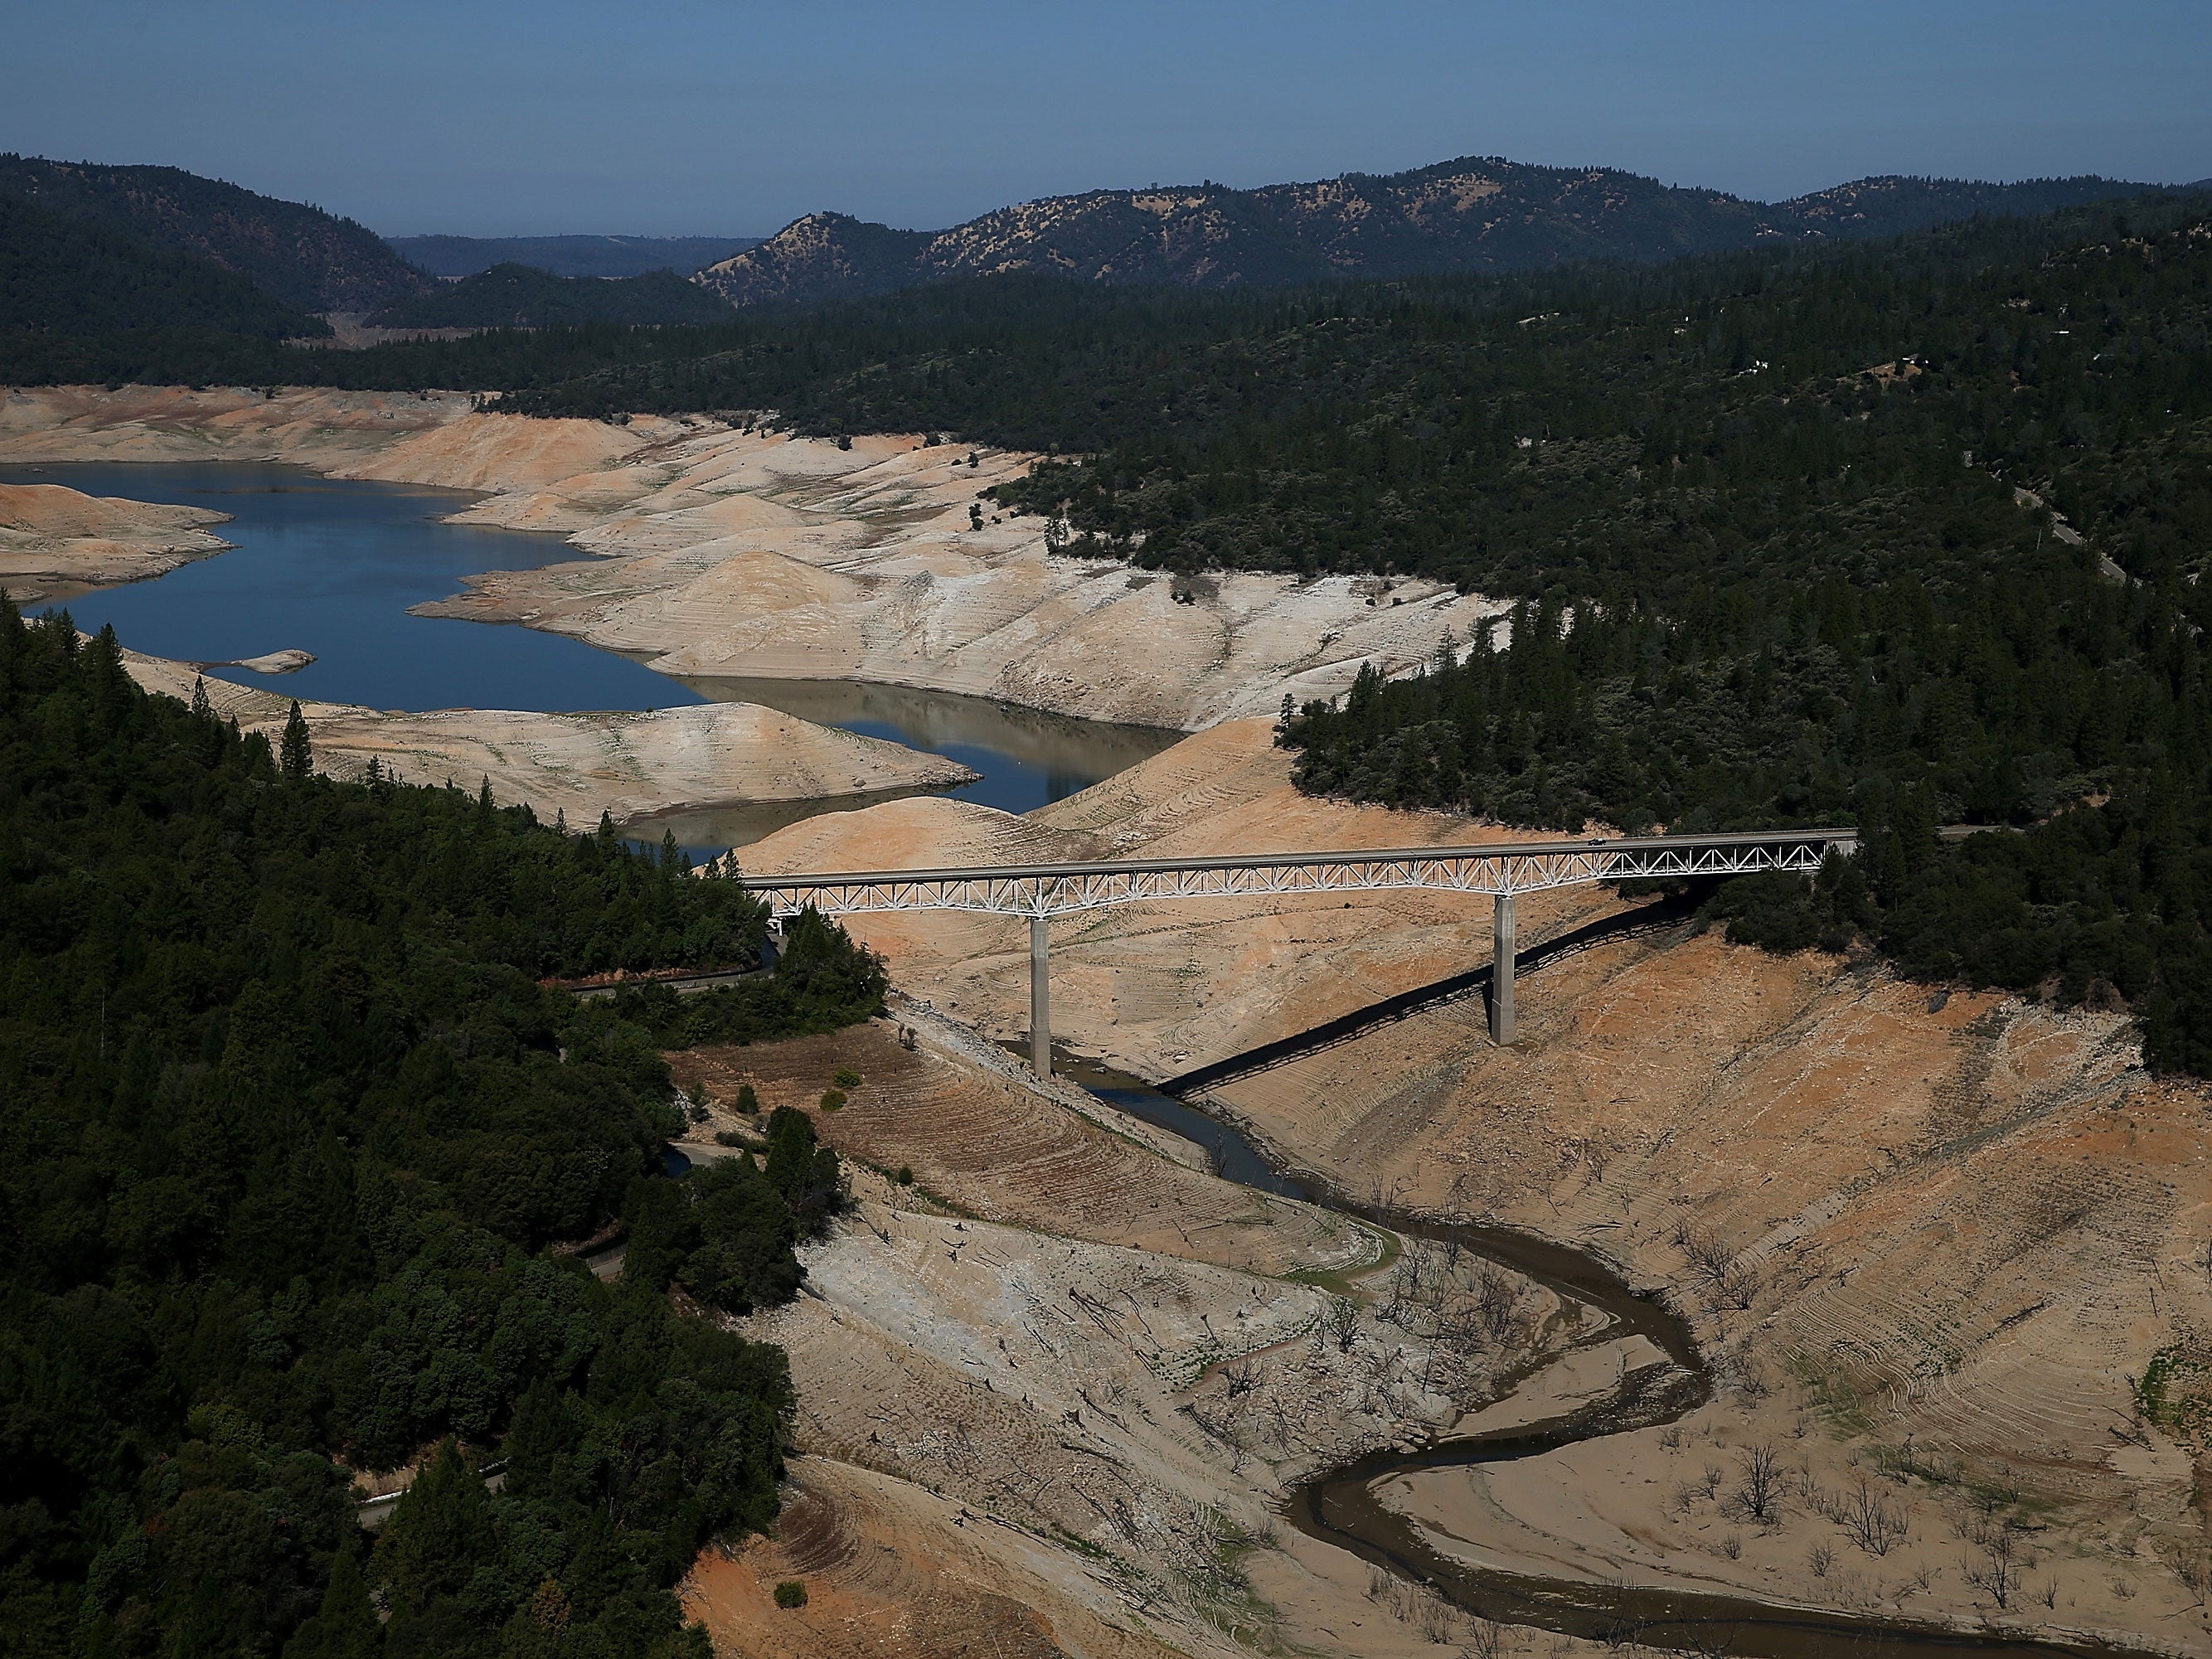 The Enterprise Bridge passes over a section of Lake Oroville that is nearly dry on August 19, 2014 in Oroville, California